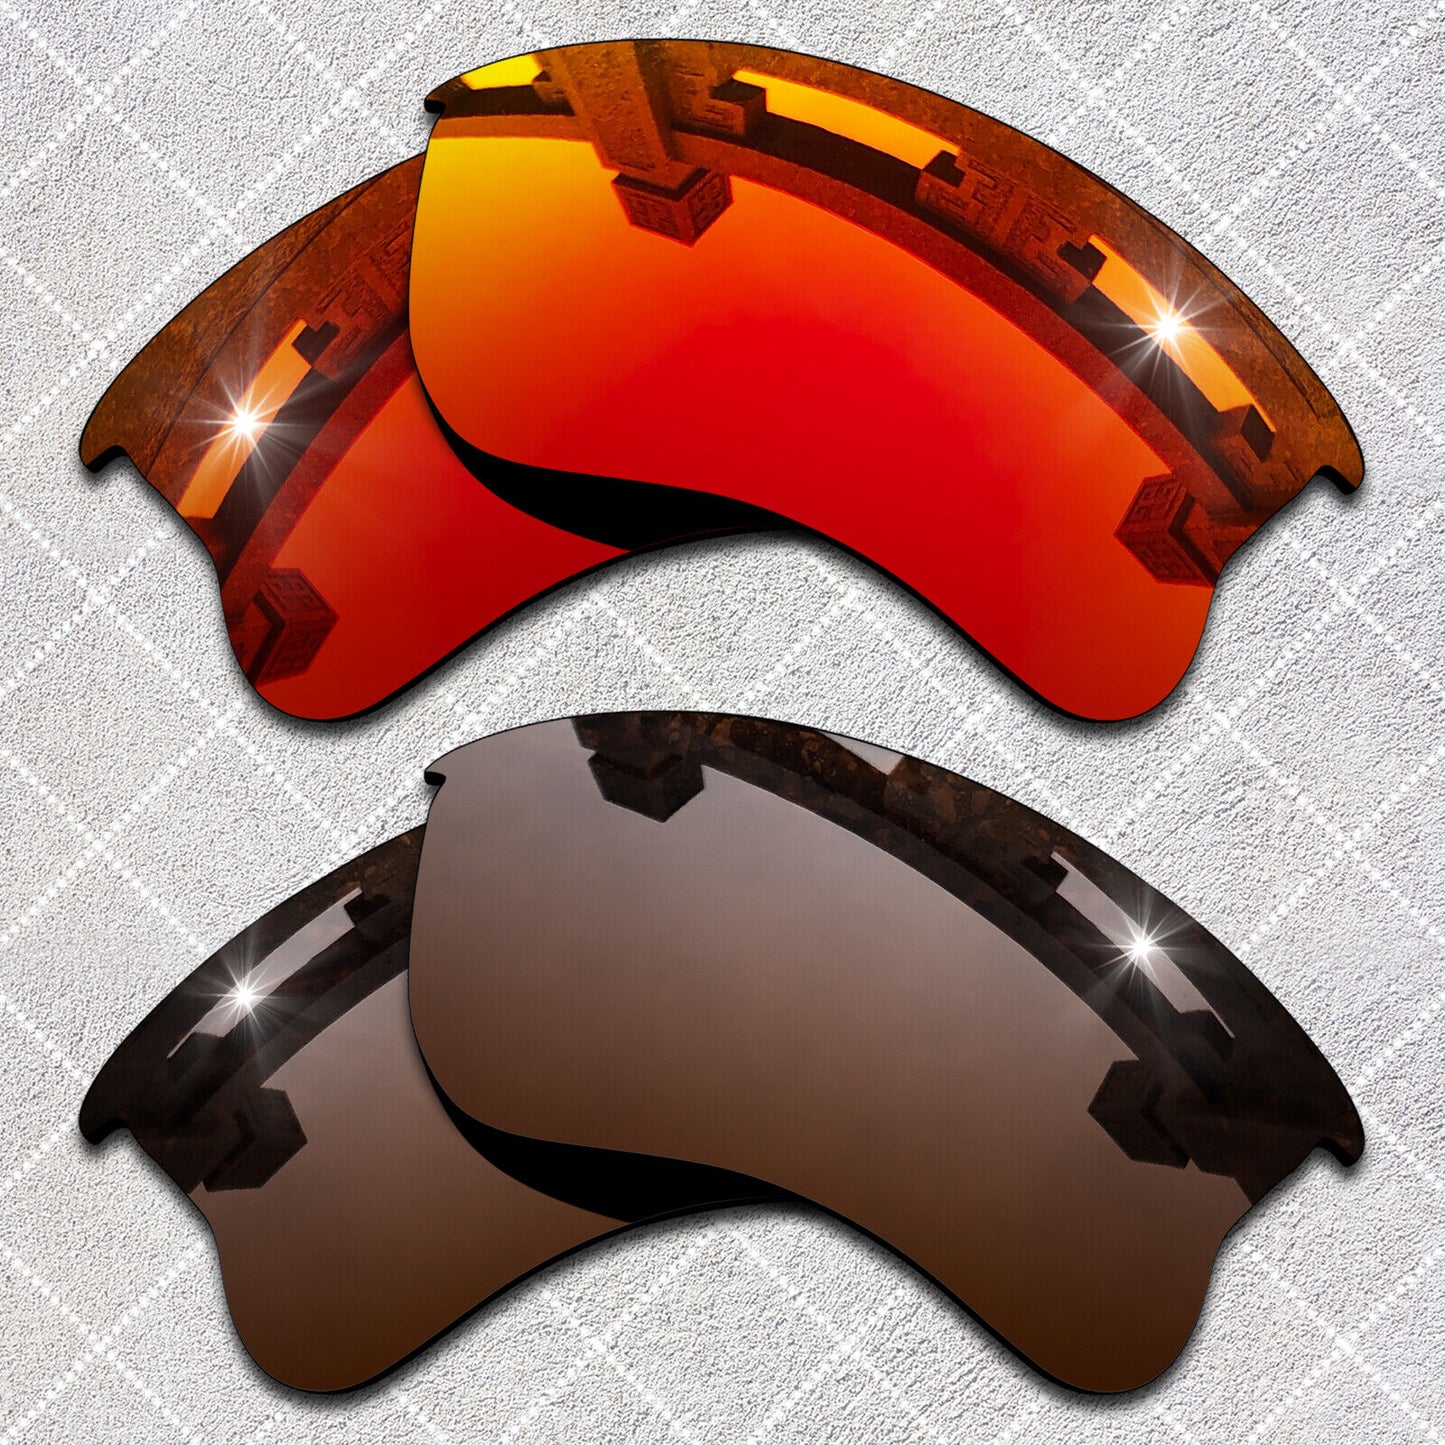 HeyRay Replacement Lenses for Flak Jacket XLJ Sunglasses Polarized -Opt